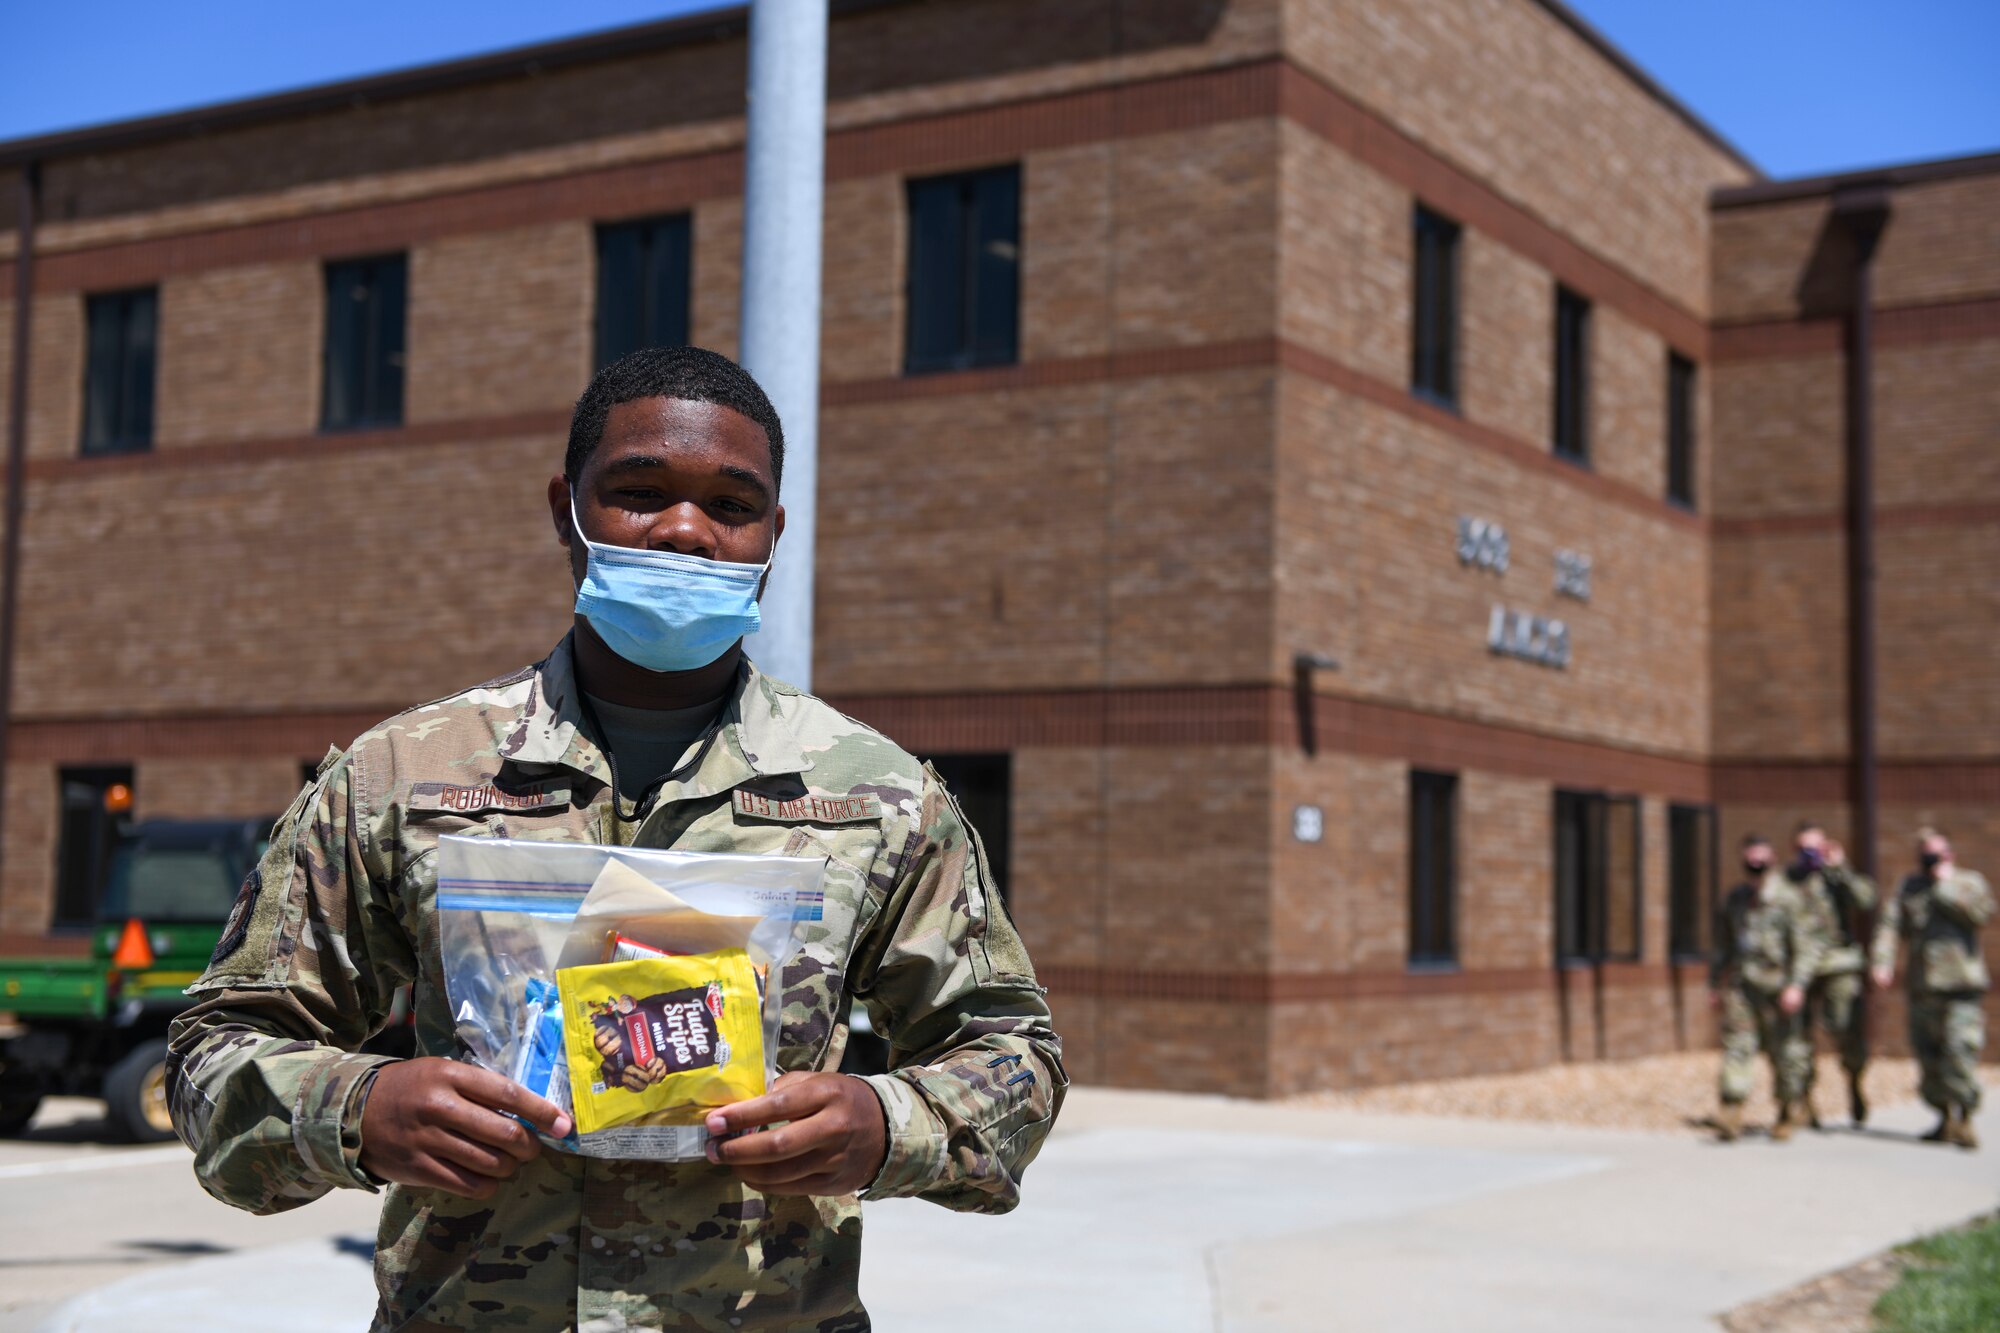 Airman 1st Class Jalen Robinson, 509th Aircraft Maintenance Squadron weapons load crew member, shows off his snack pack, at Whiteman Air Force Base, Missouri, May 5, 2021. The 509th AMXS Whiteman Base Community Council Concordia, Missouri, liaison delivered the snacks to support the Airmen through an exercise. (U.S. Air Force photo by Staff Sgt. Sadie Colbert)